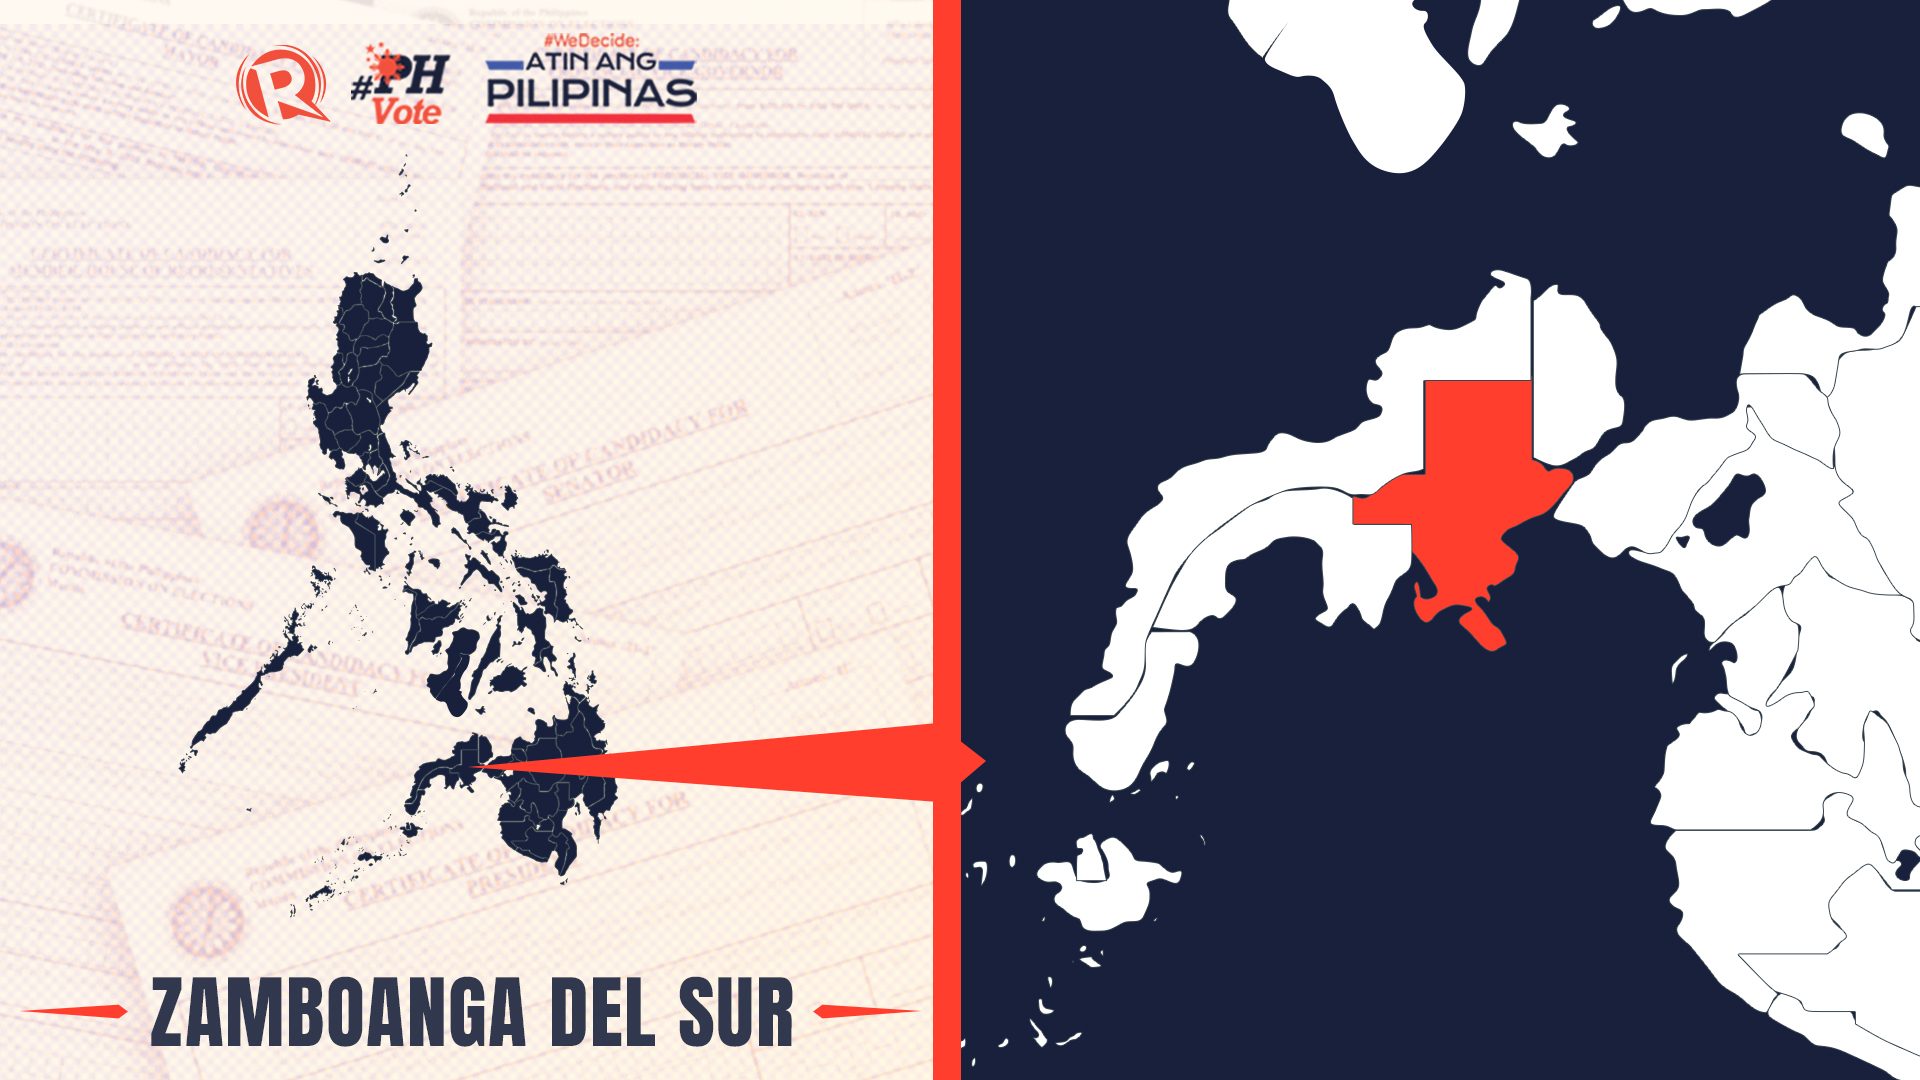 LIST: Who is running in Zamboanga del Sur in the 2022 Philippine elections?